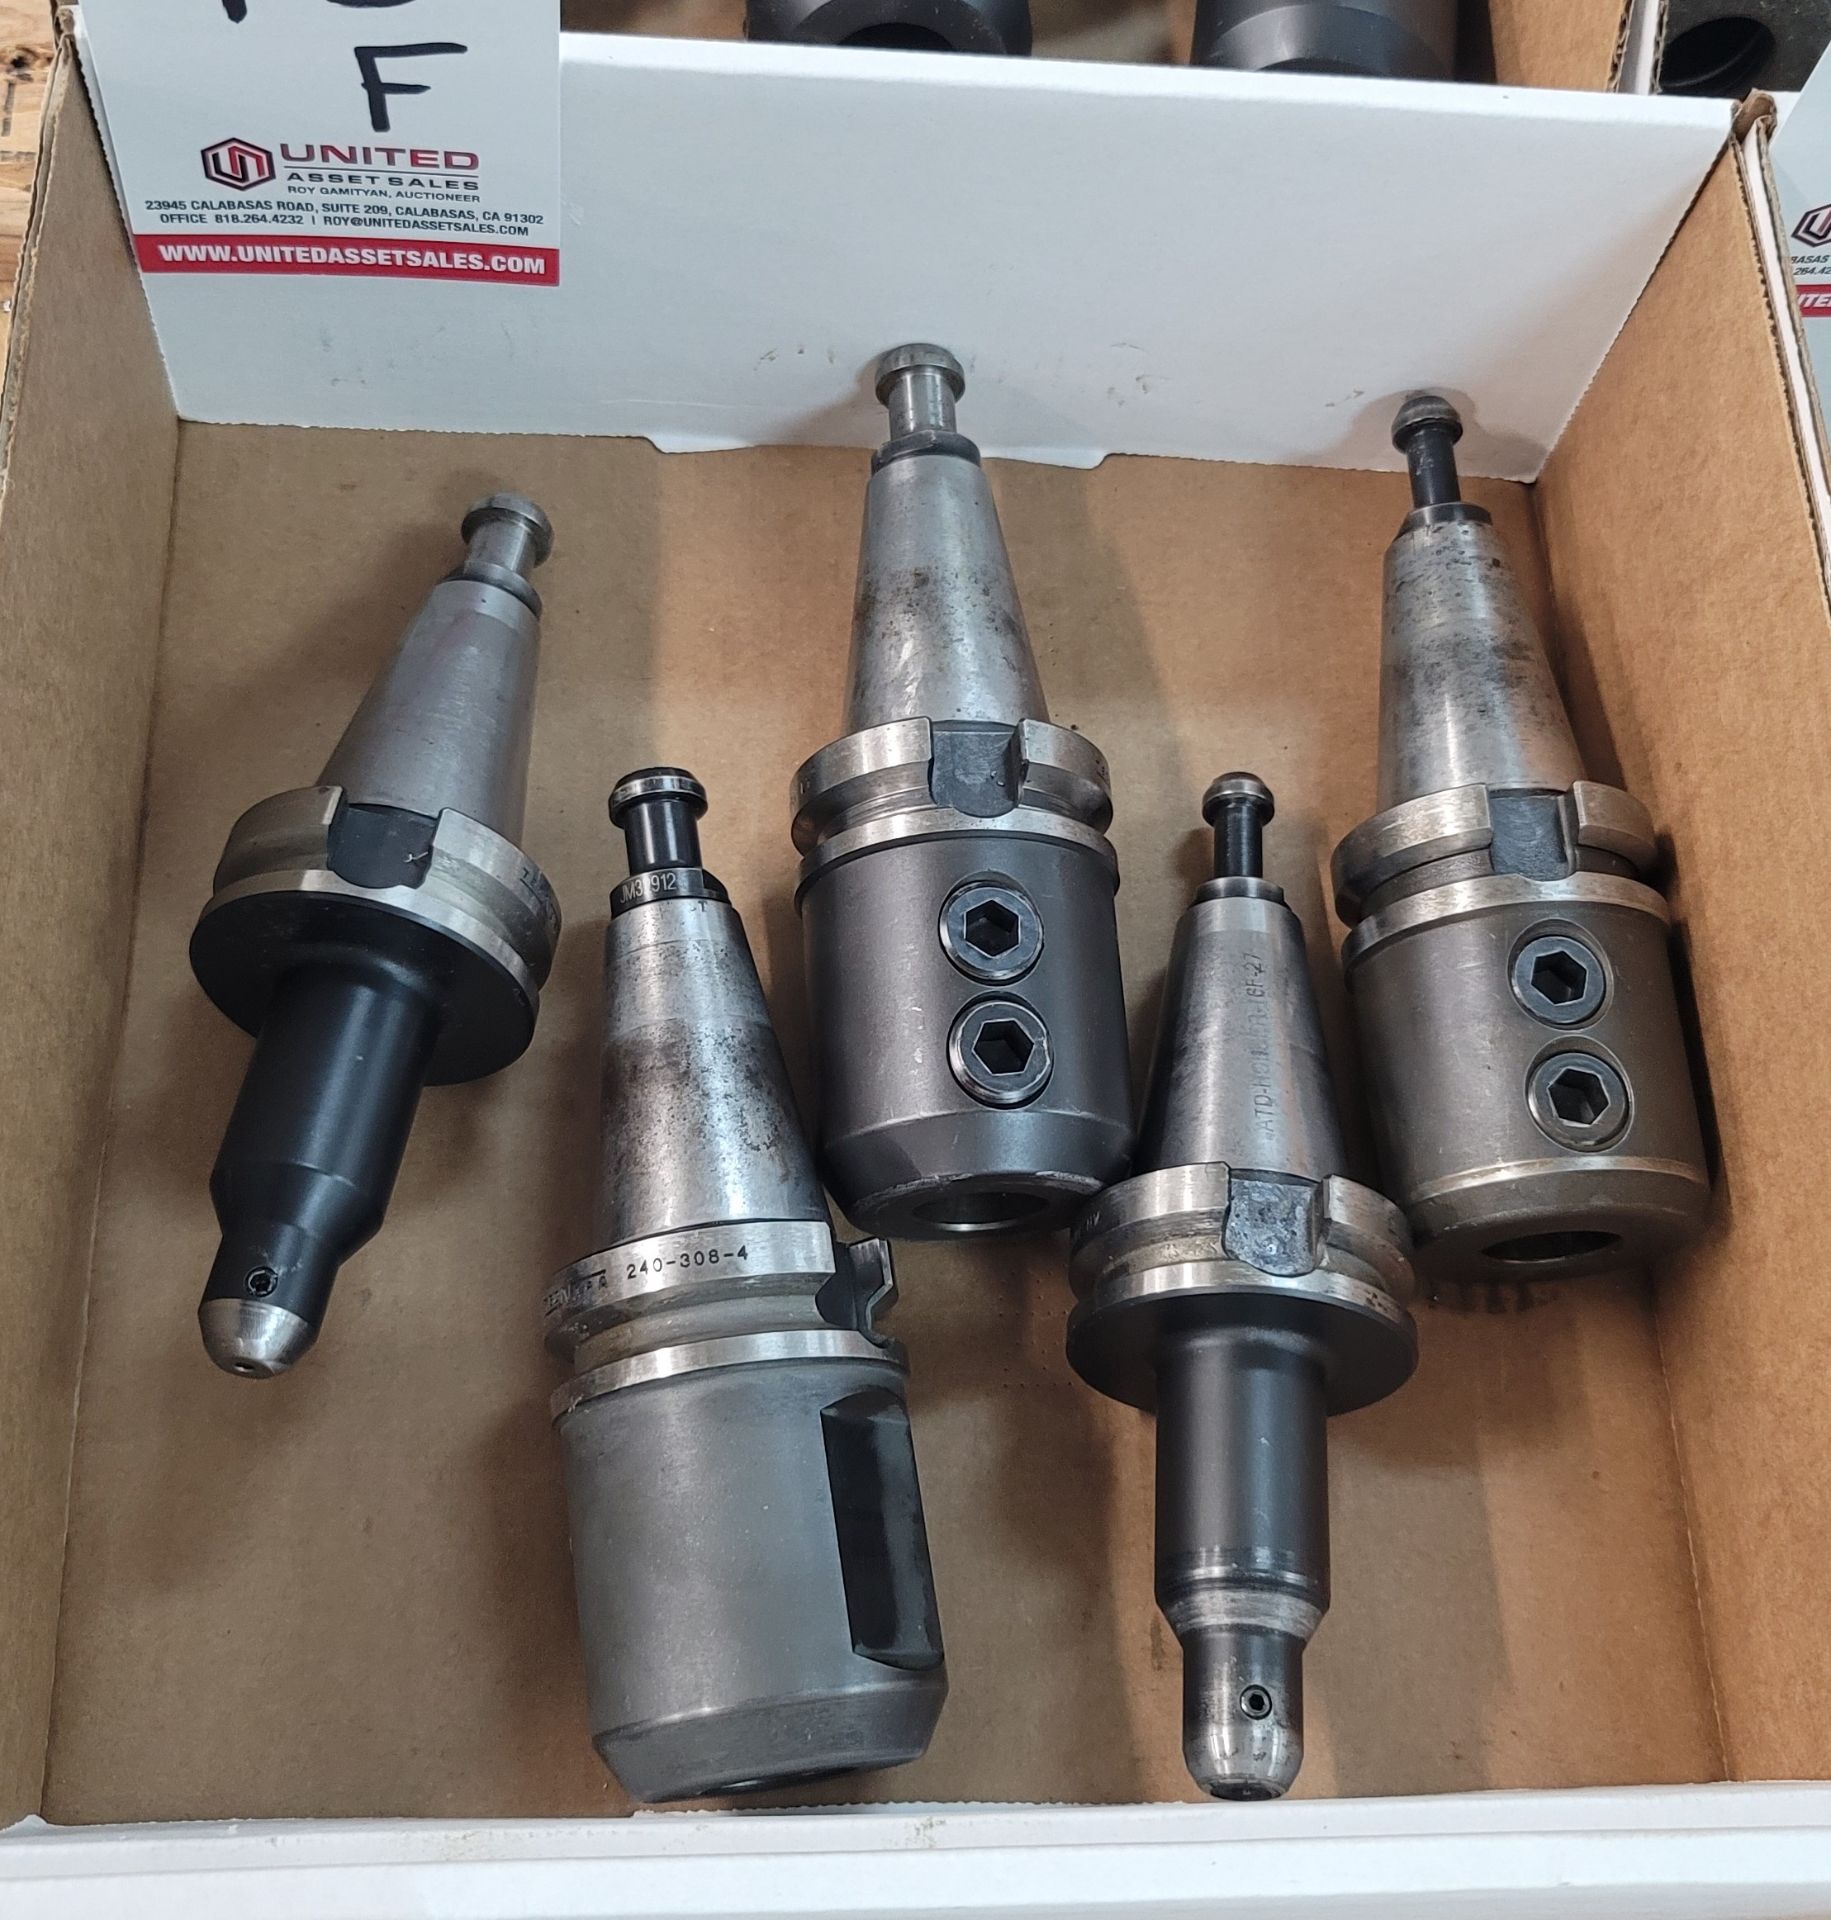 LOT - (5) BT-40 TOOL HOLDERS: (3) 1" SOLID AND (2) 1/8" SOLID, **IMMEX REGISTERED EQUIPMENT (NEEDS